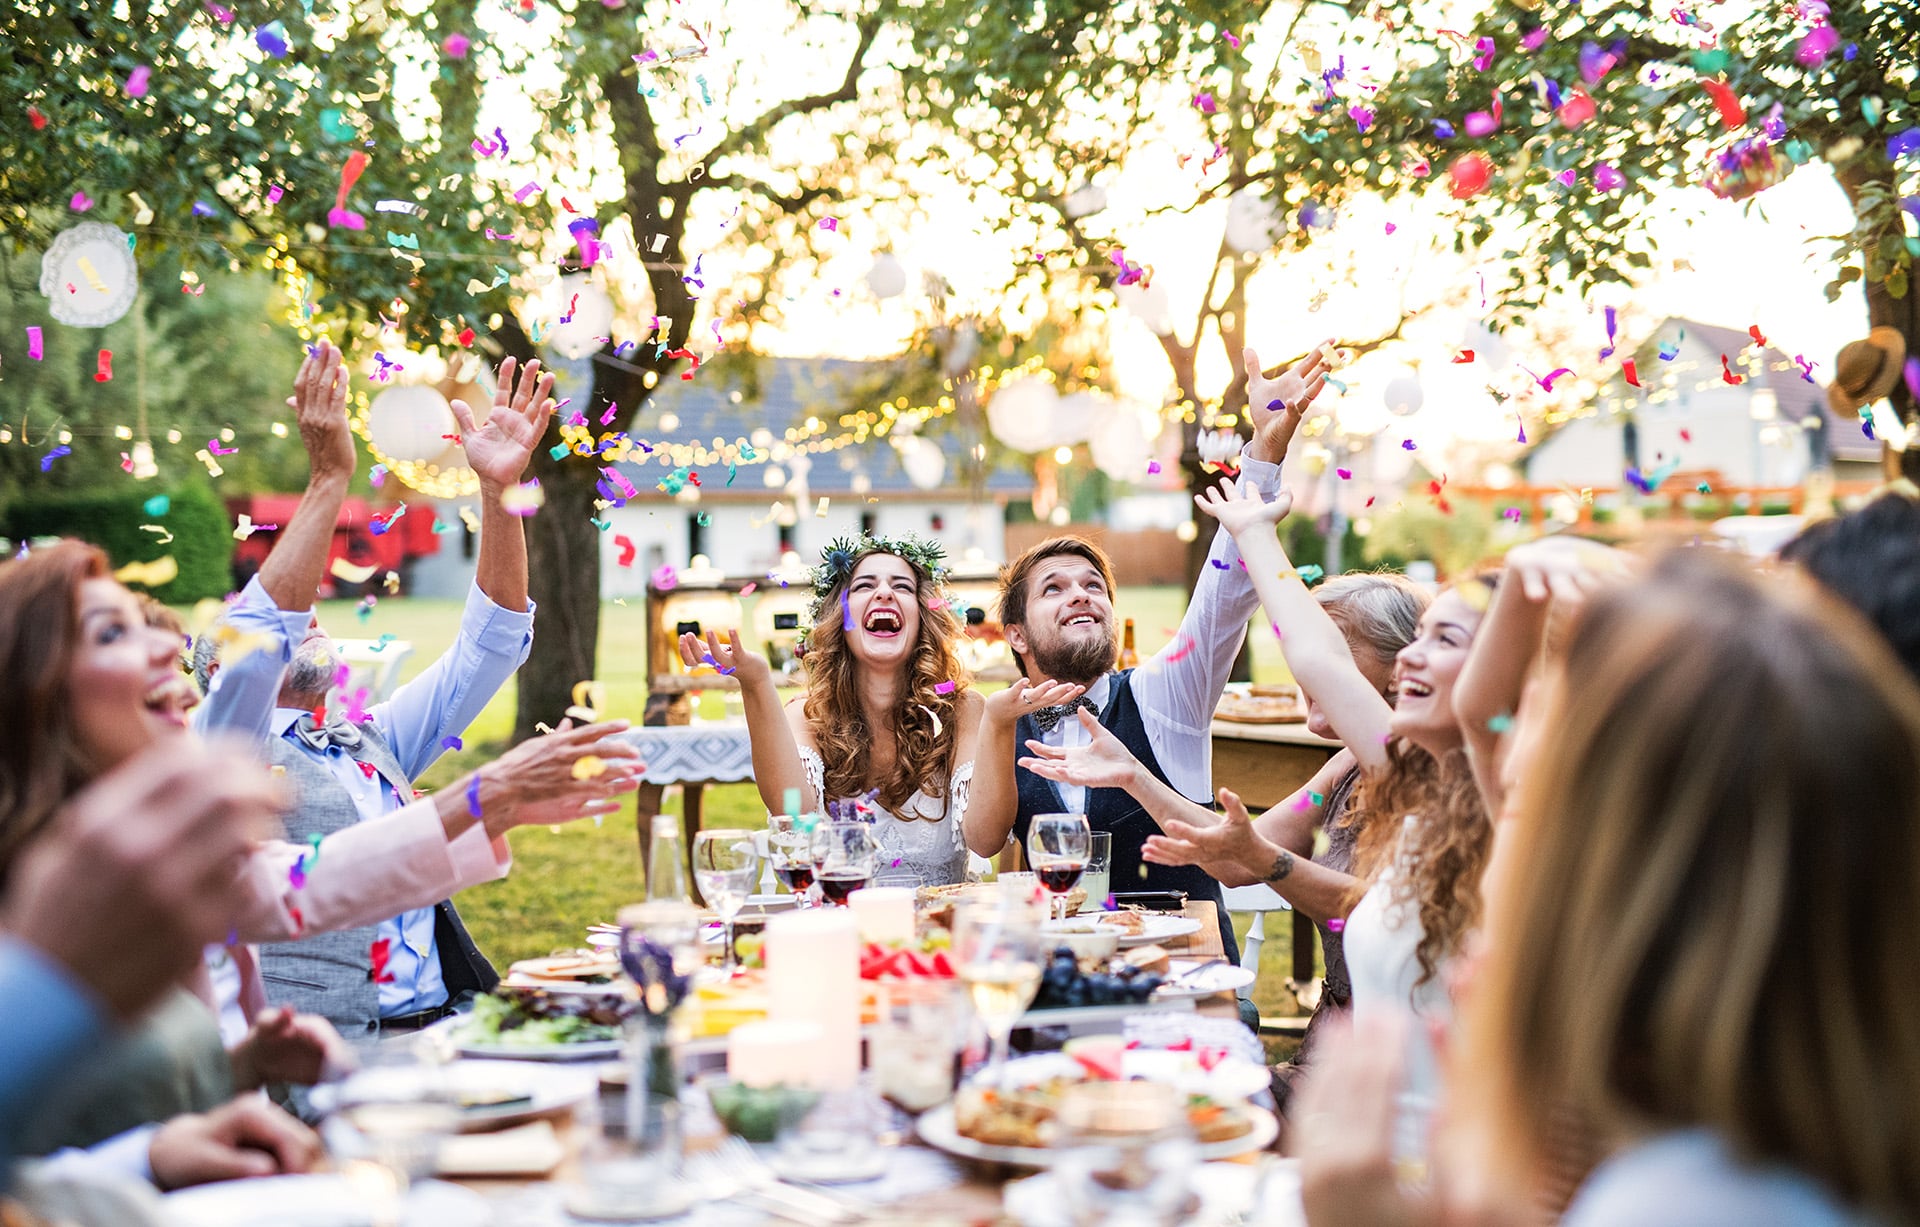 An outdoor wedding dinner event with confetti being catered by Bravo!